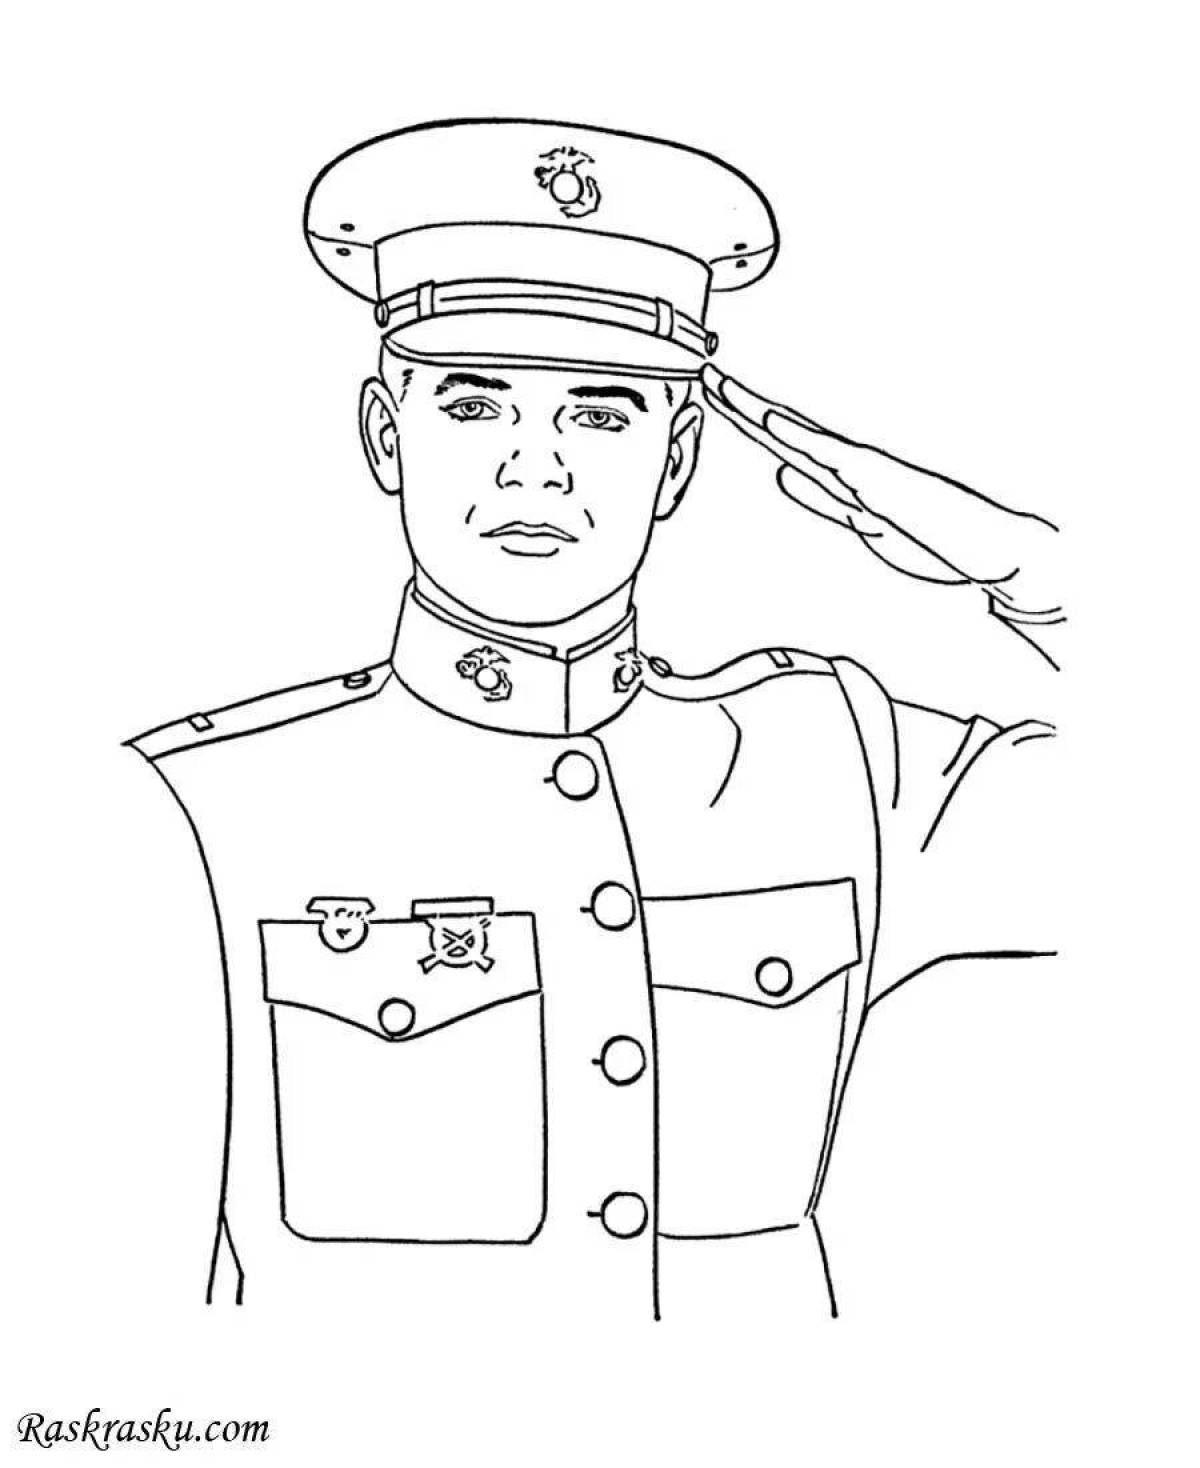 Courageous senior soldiers coloring page